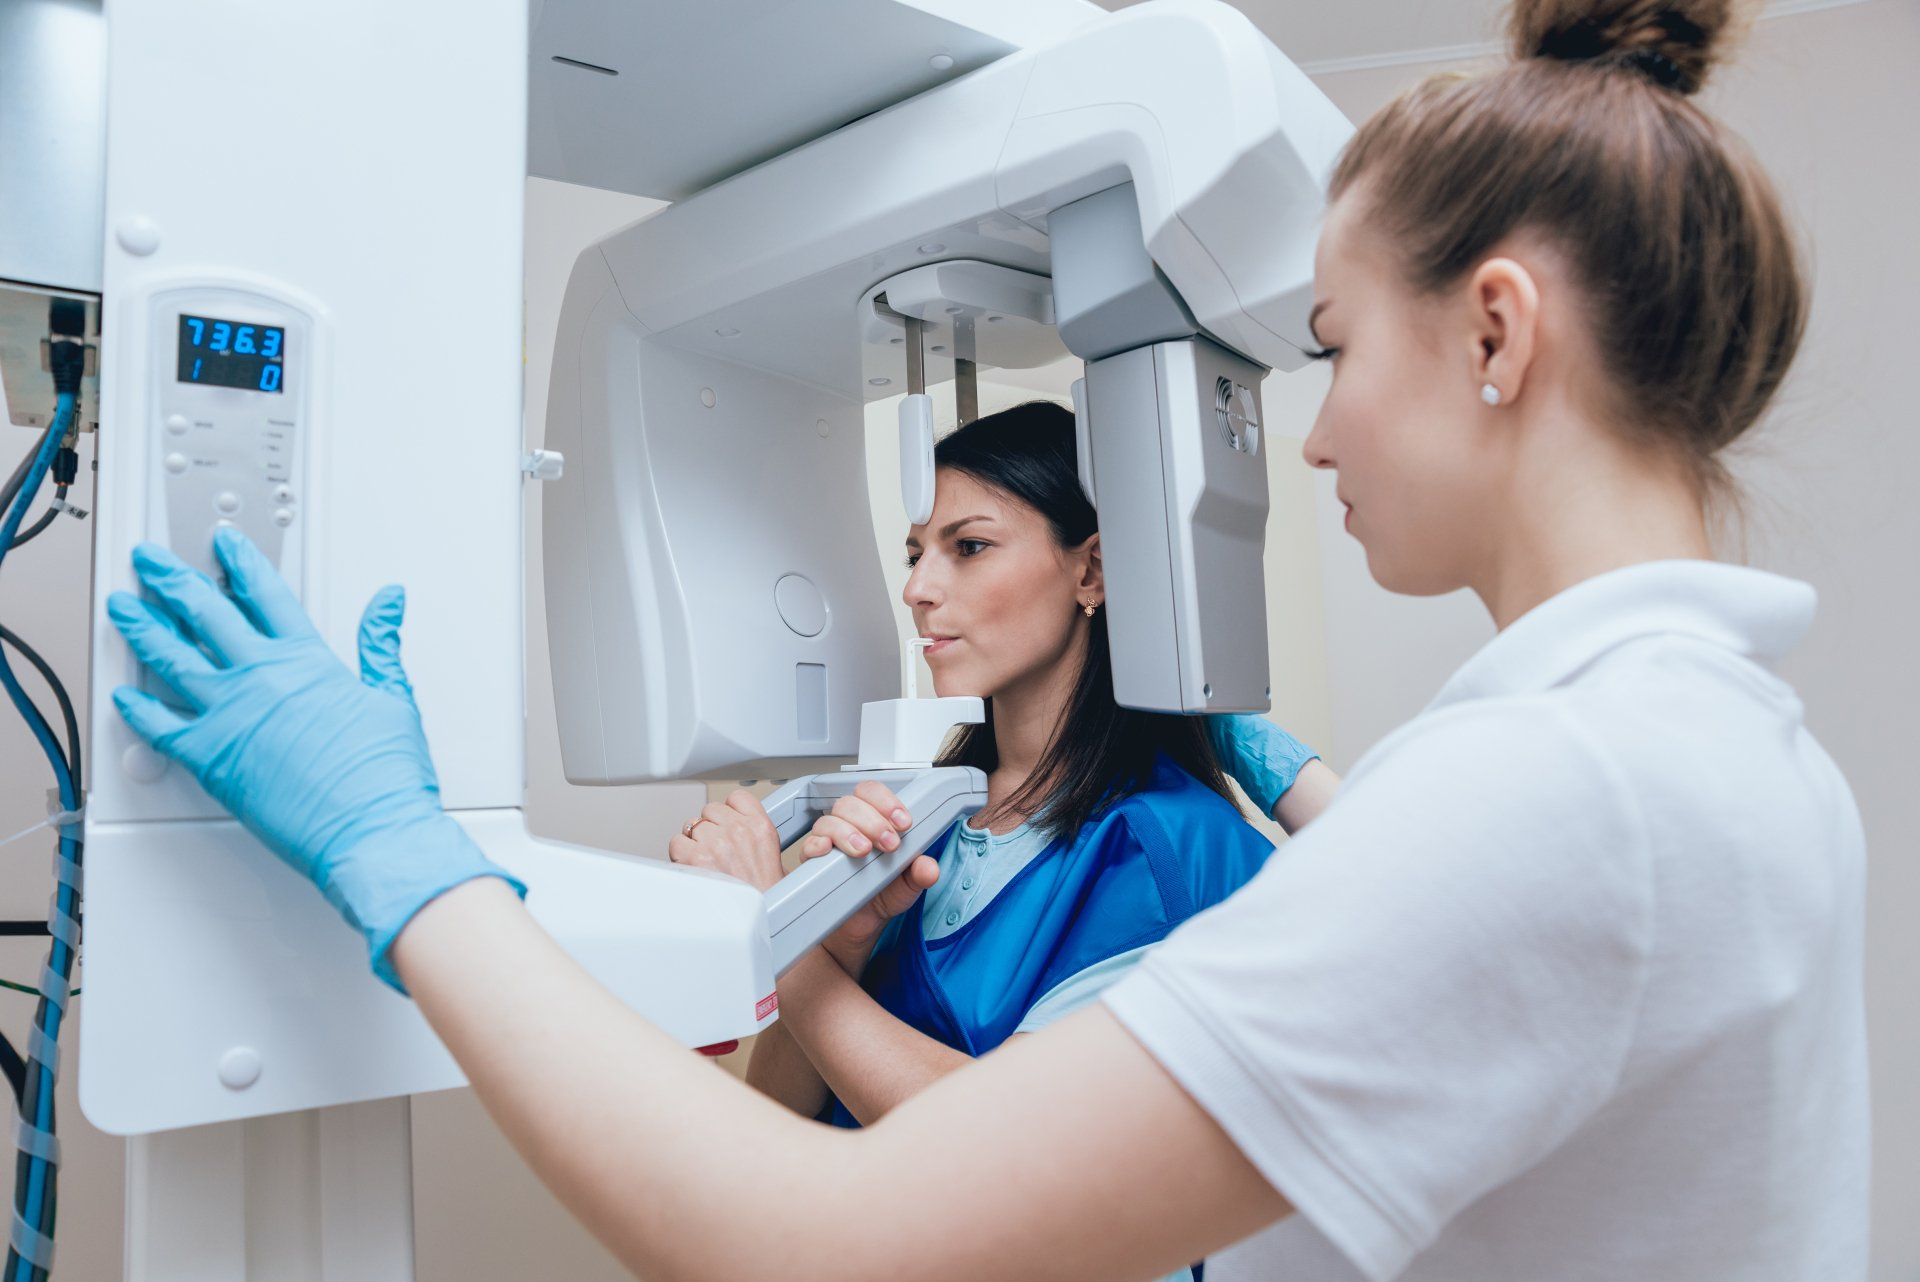 Dental technology | x ray machine | dentist near you | female patient getting an x ray | Miller Dentistry | Best Dentist in League City, Texas